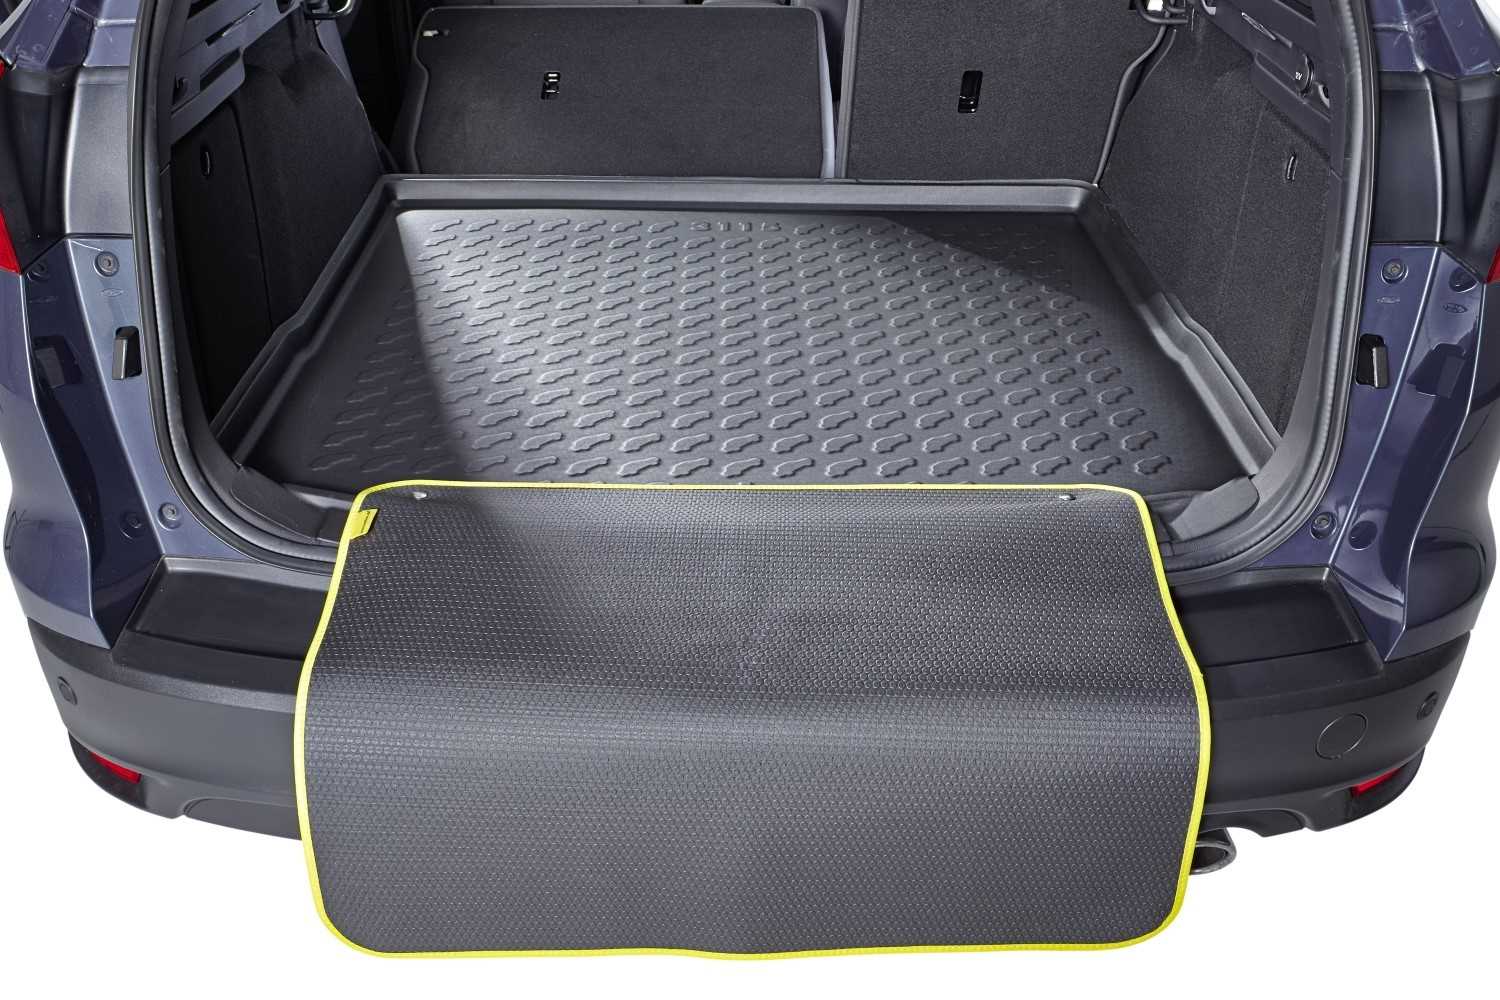 https://www.carparts-expert.com/images/stories/virtuemart/product/multi8060-2-multi-mat-with-snap-buttons-80x60-cm-1.jpg